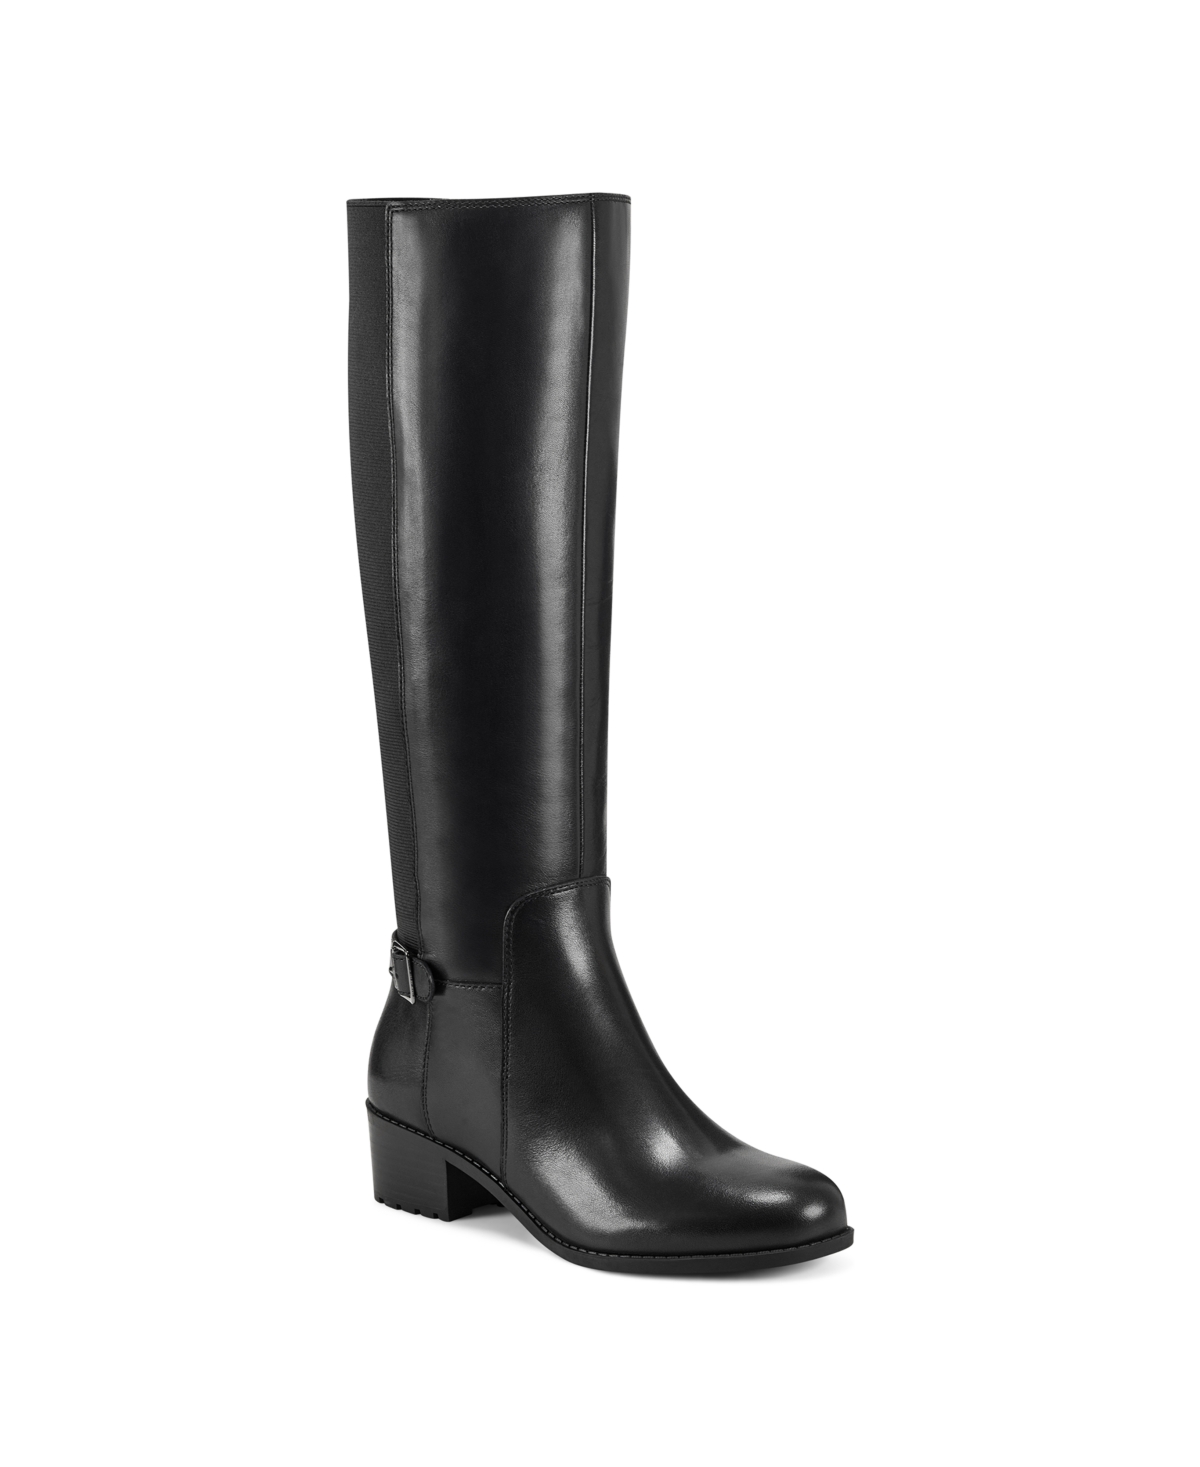 UPC 195608202298 product image for Easy Spirit Women's Chaza Tall Regular Calf Boots Women's Shoes | upcitemdb.com